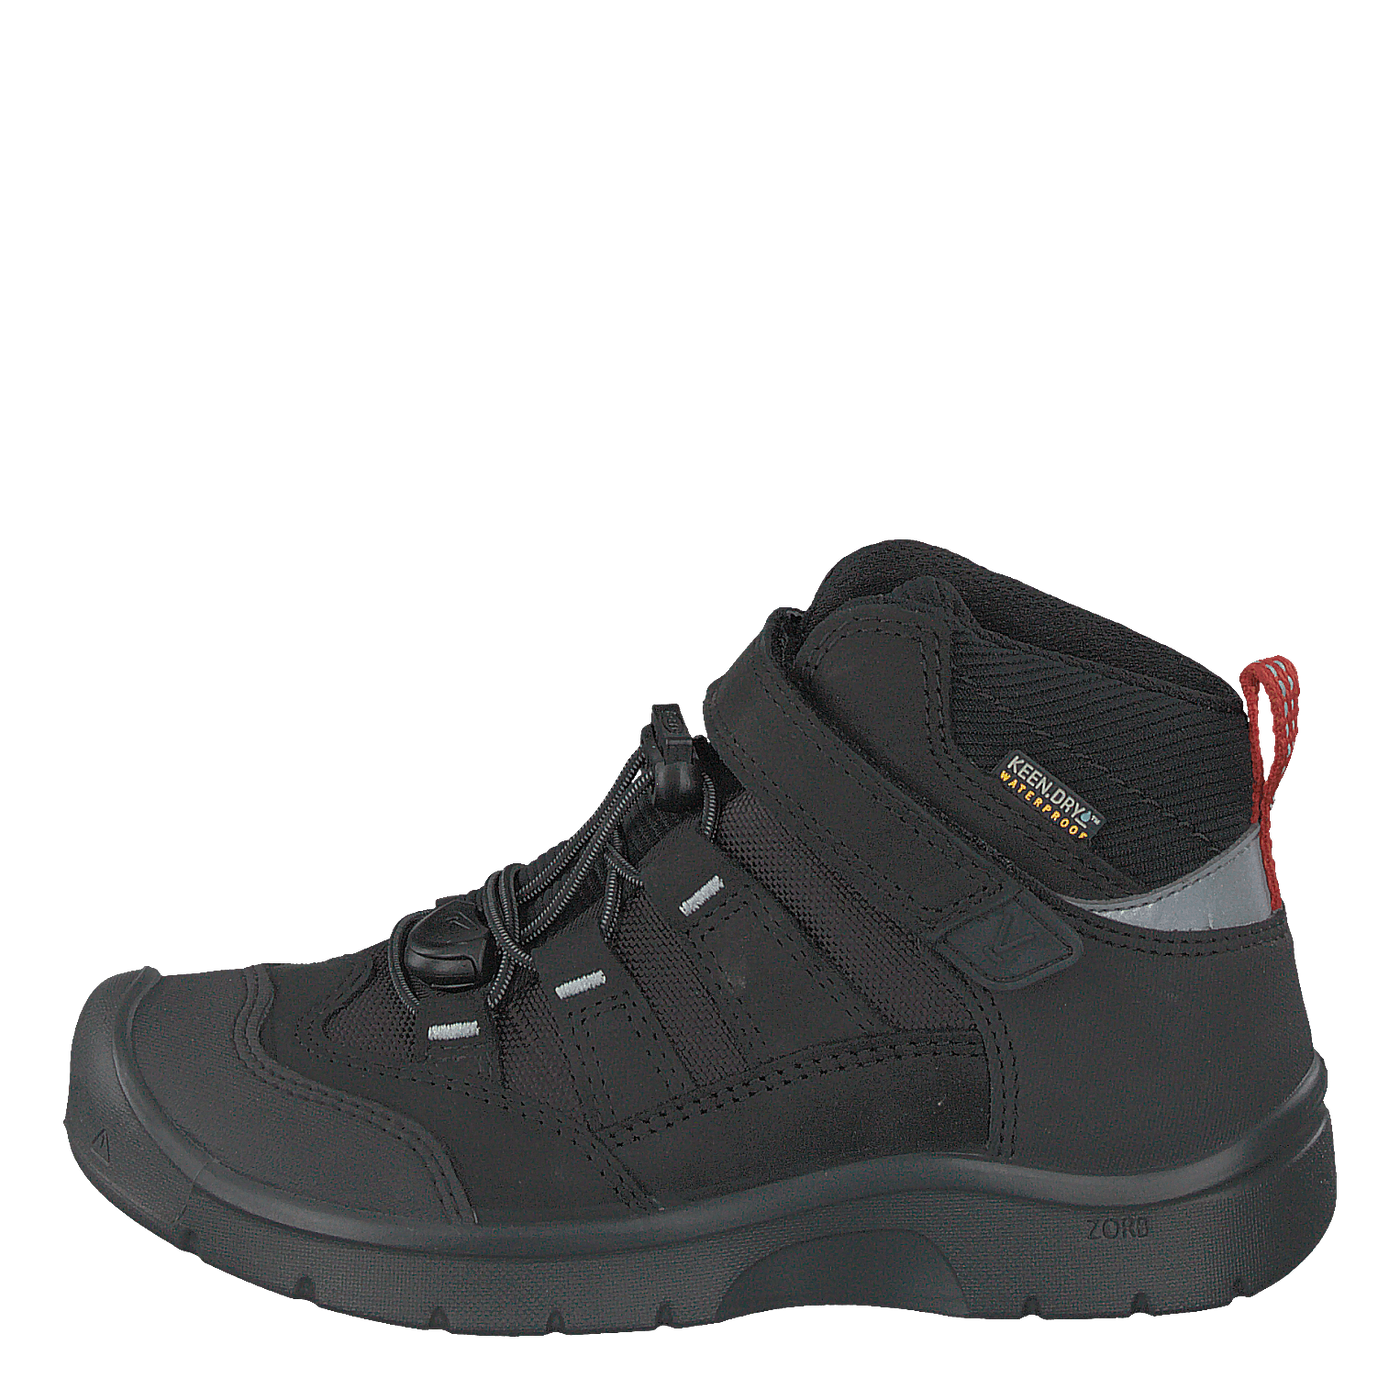 Hikeport Mid Wp Black/bright Red